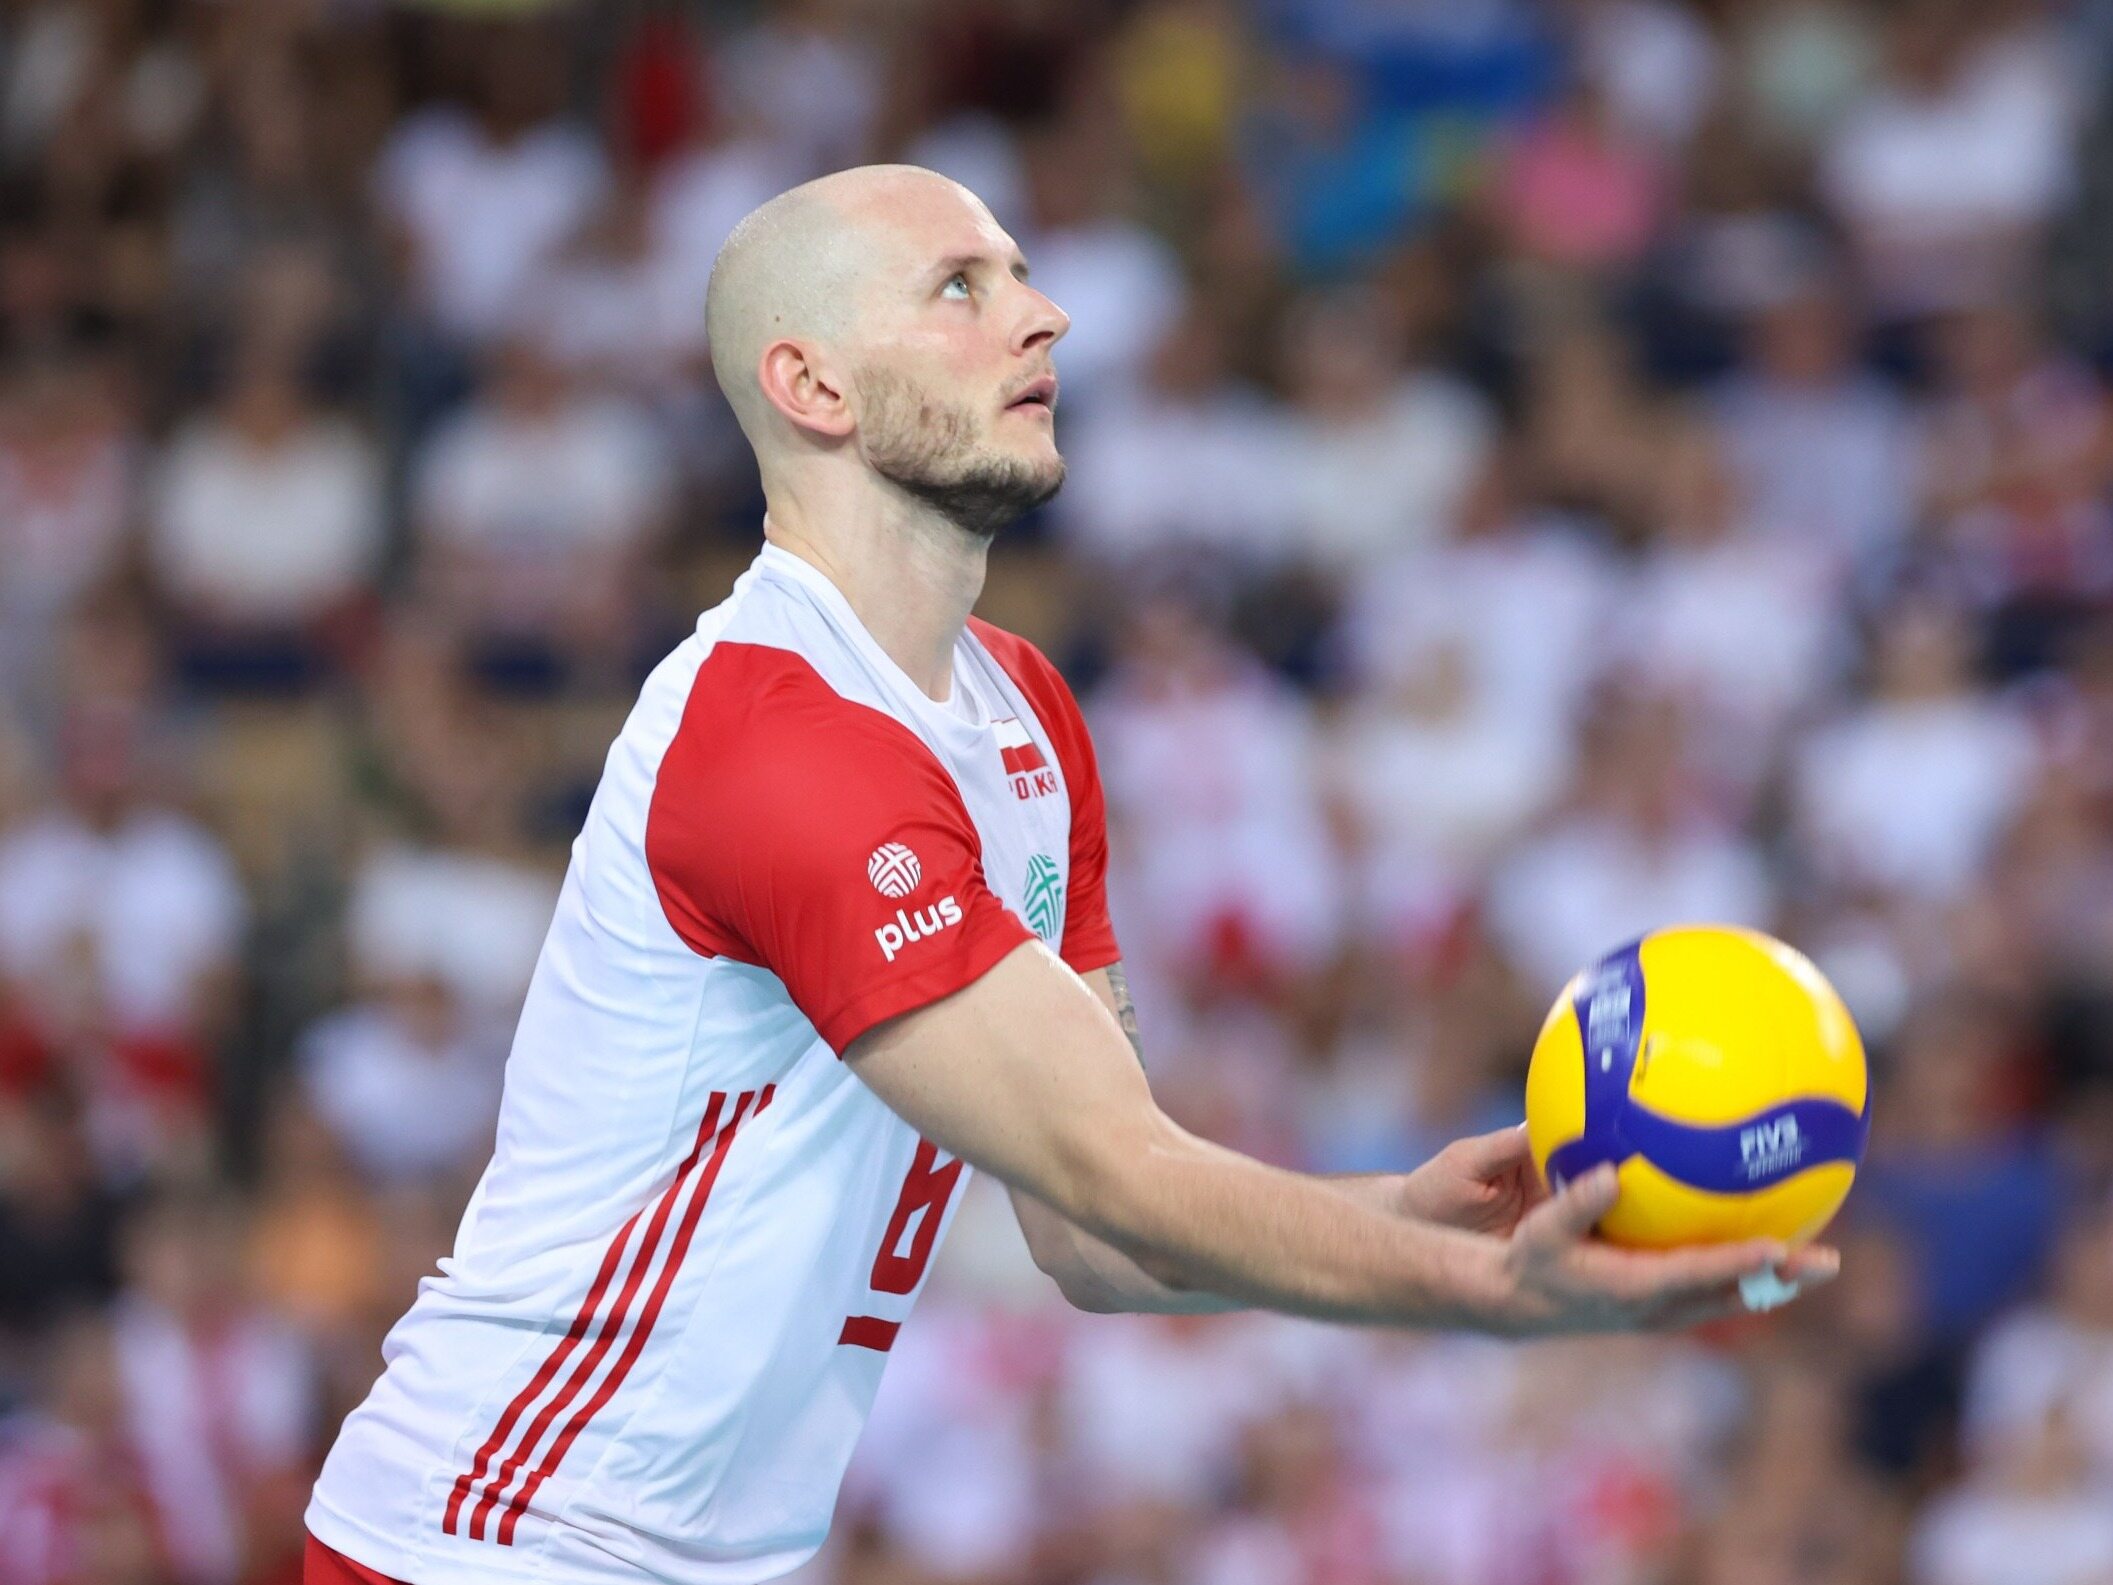 Bartosz Kurek compared him to Cristiano Ronaldo.  What a compliment for a volleyball player!